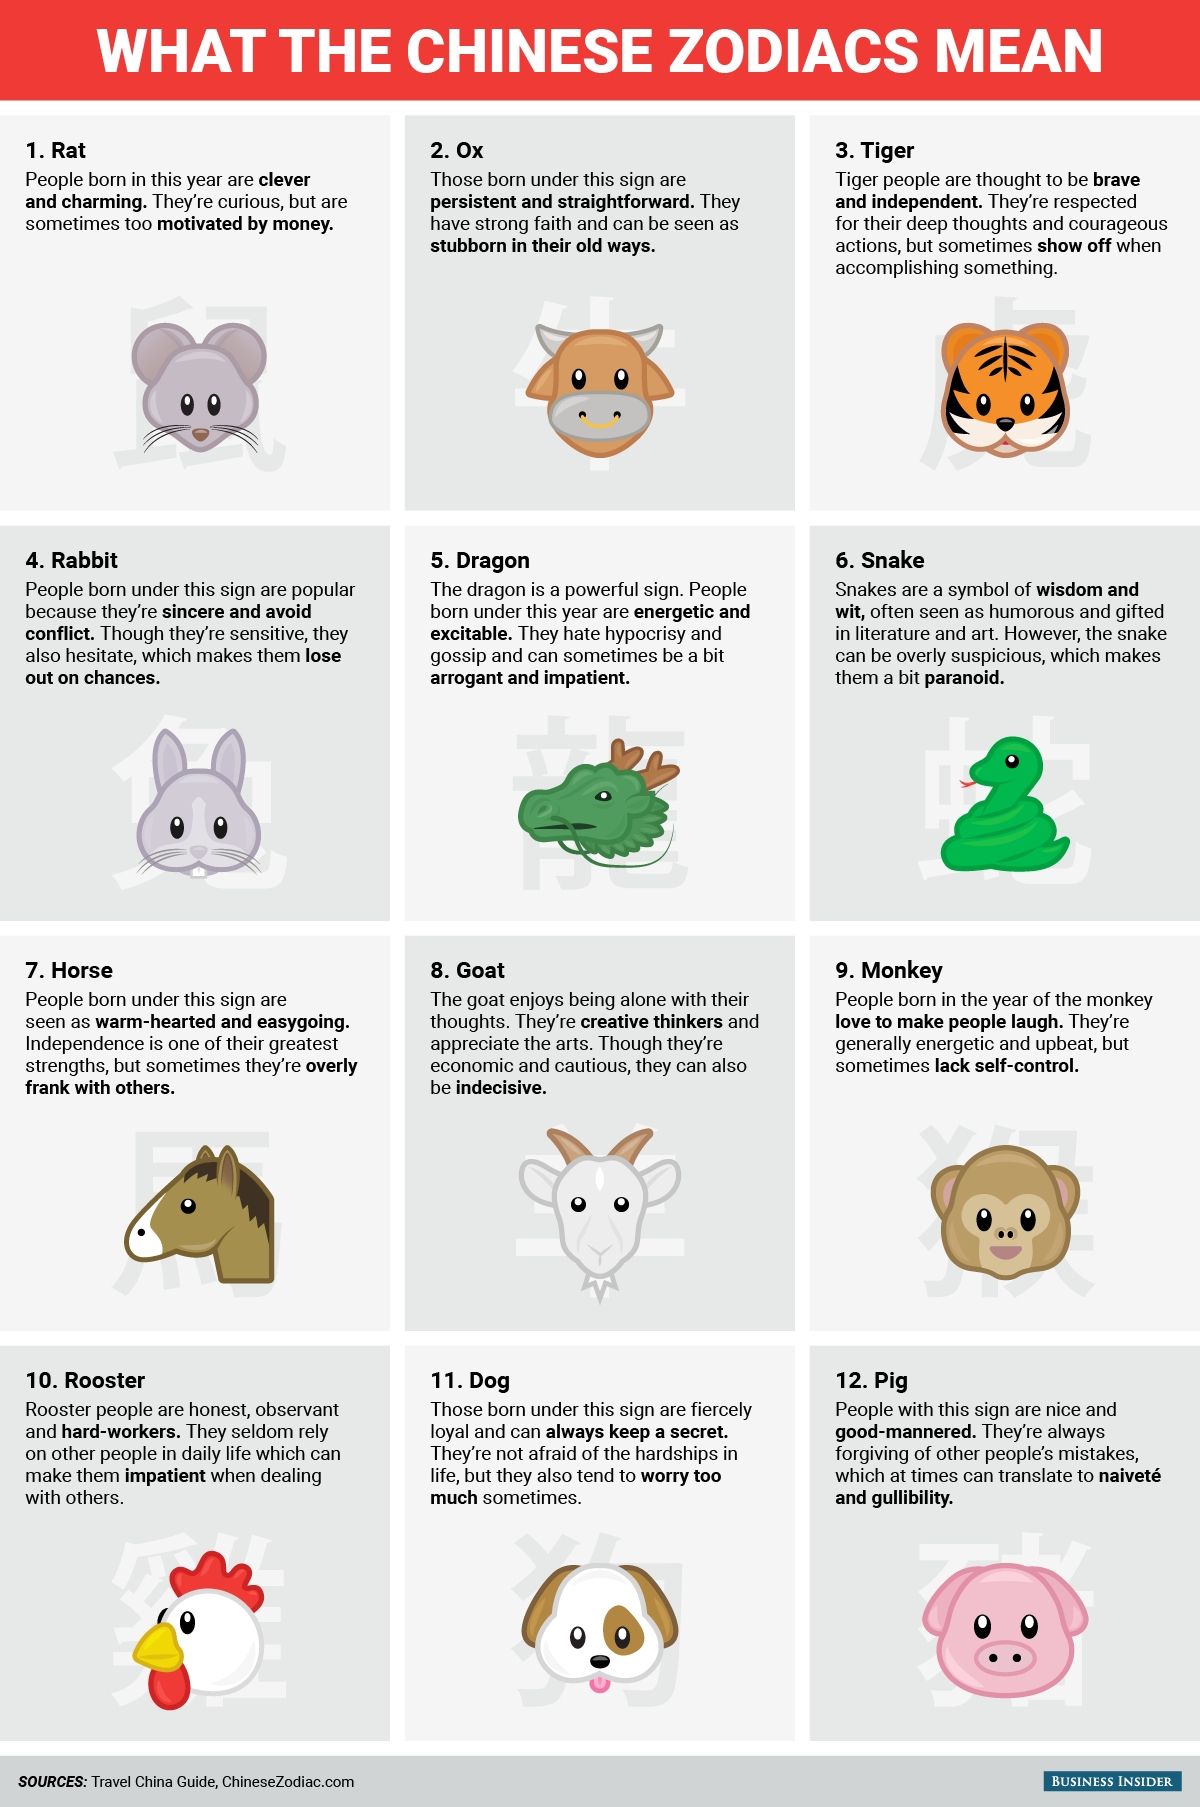 Happy Chinese New Year! This Is What The Chinese Zodiac Says